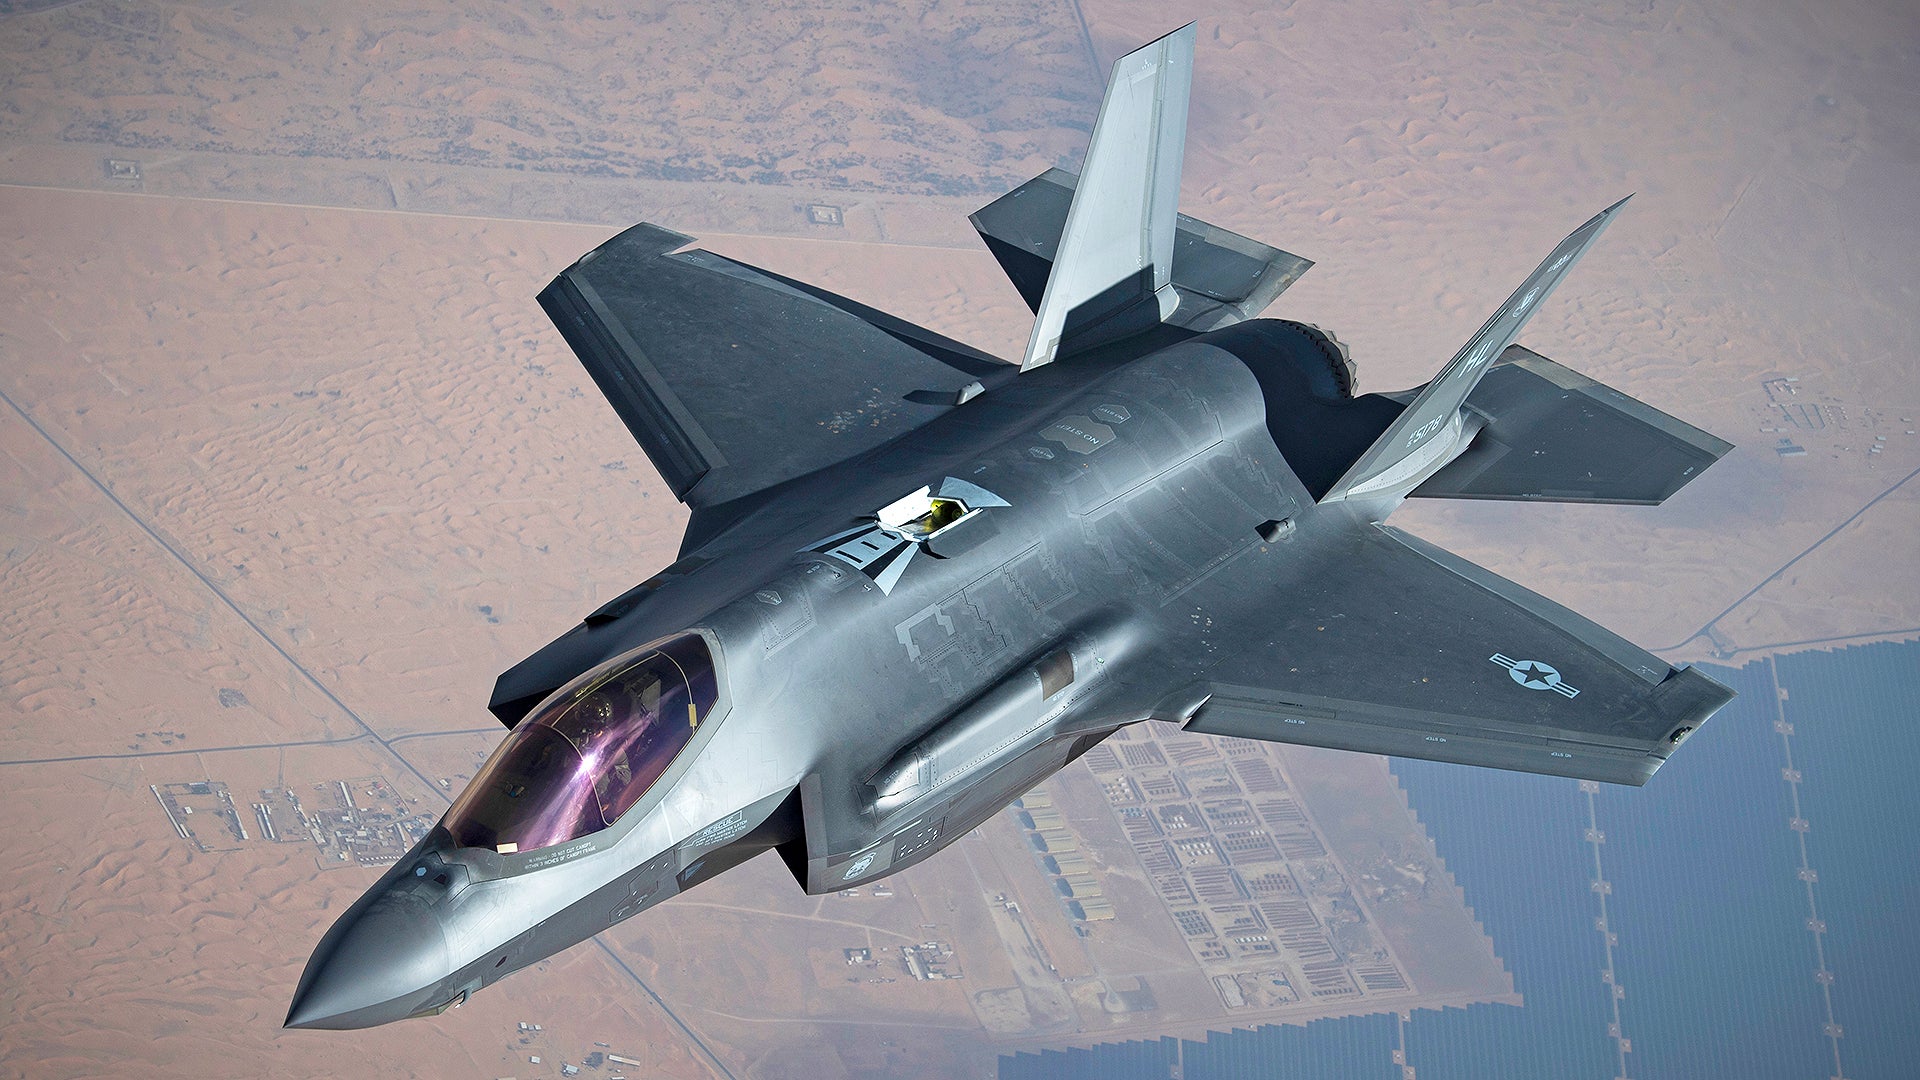 UAE F-35 Stealth Fighter Deal Hangs By A Thread Amid Chinese Espionage Worries